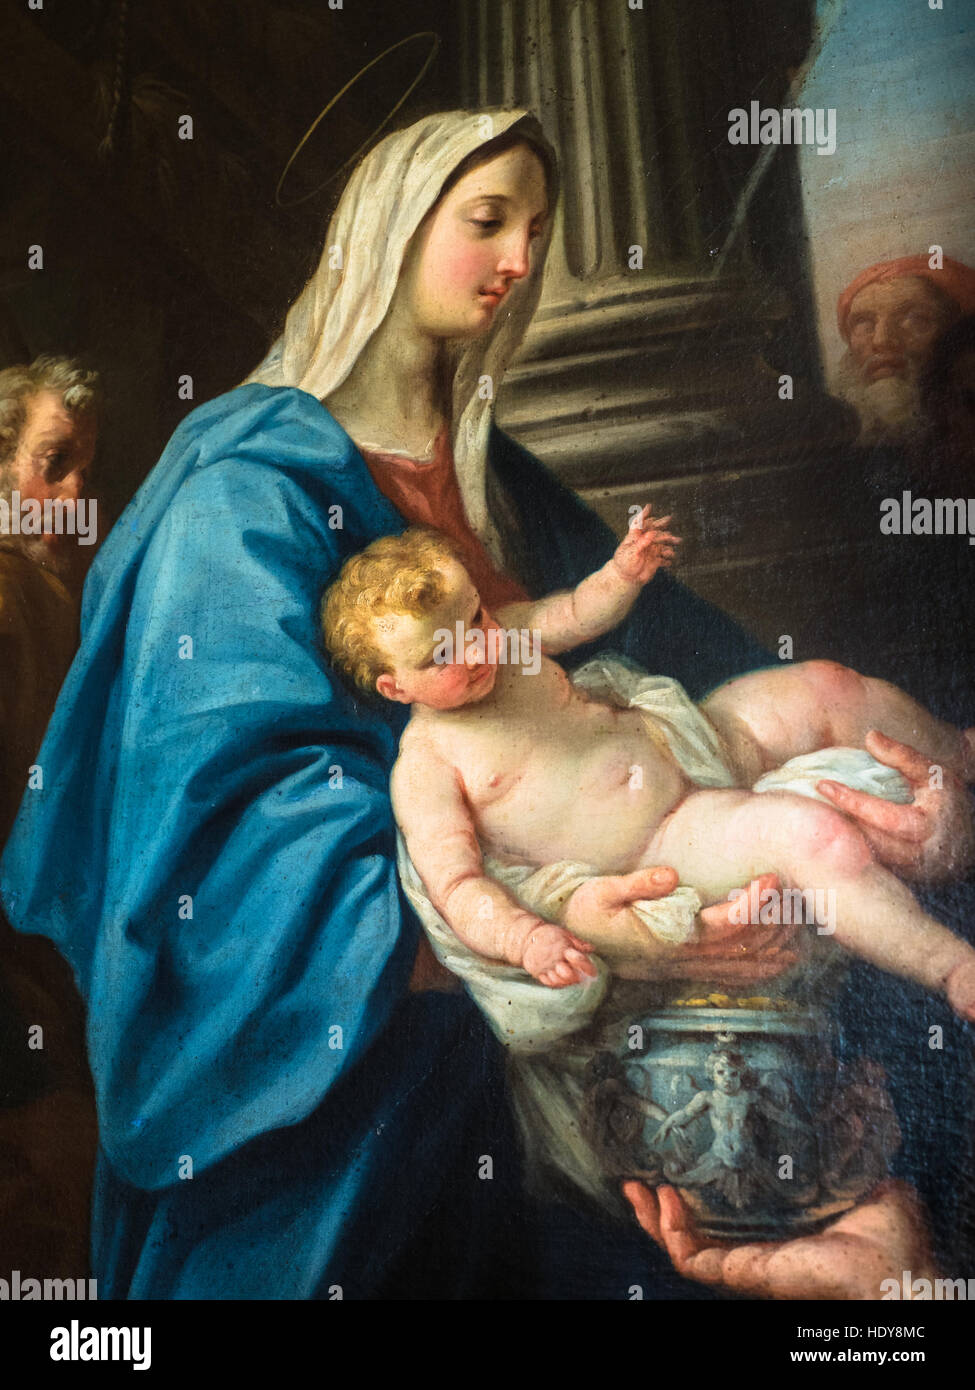 Vicenza, Italy - May 13, 2015: Detail of the painting on the ceiling of the cathedral. Stock Photo